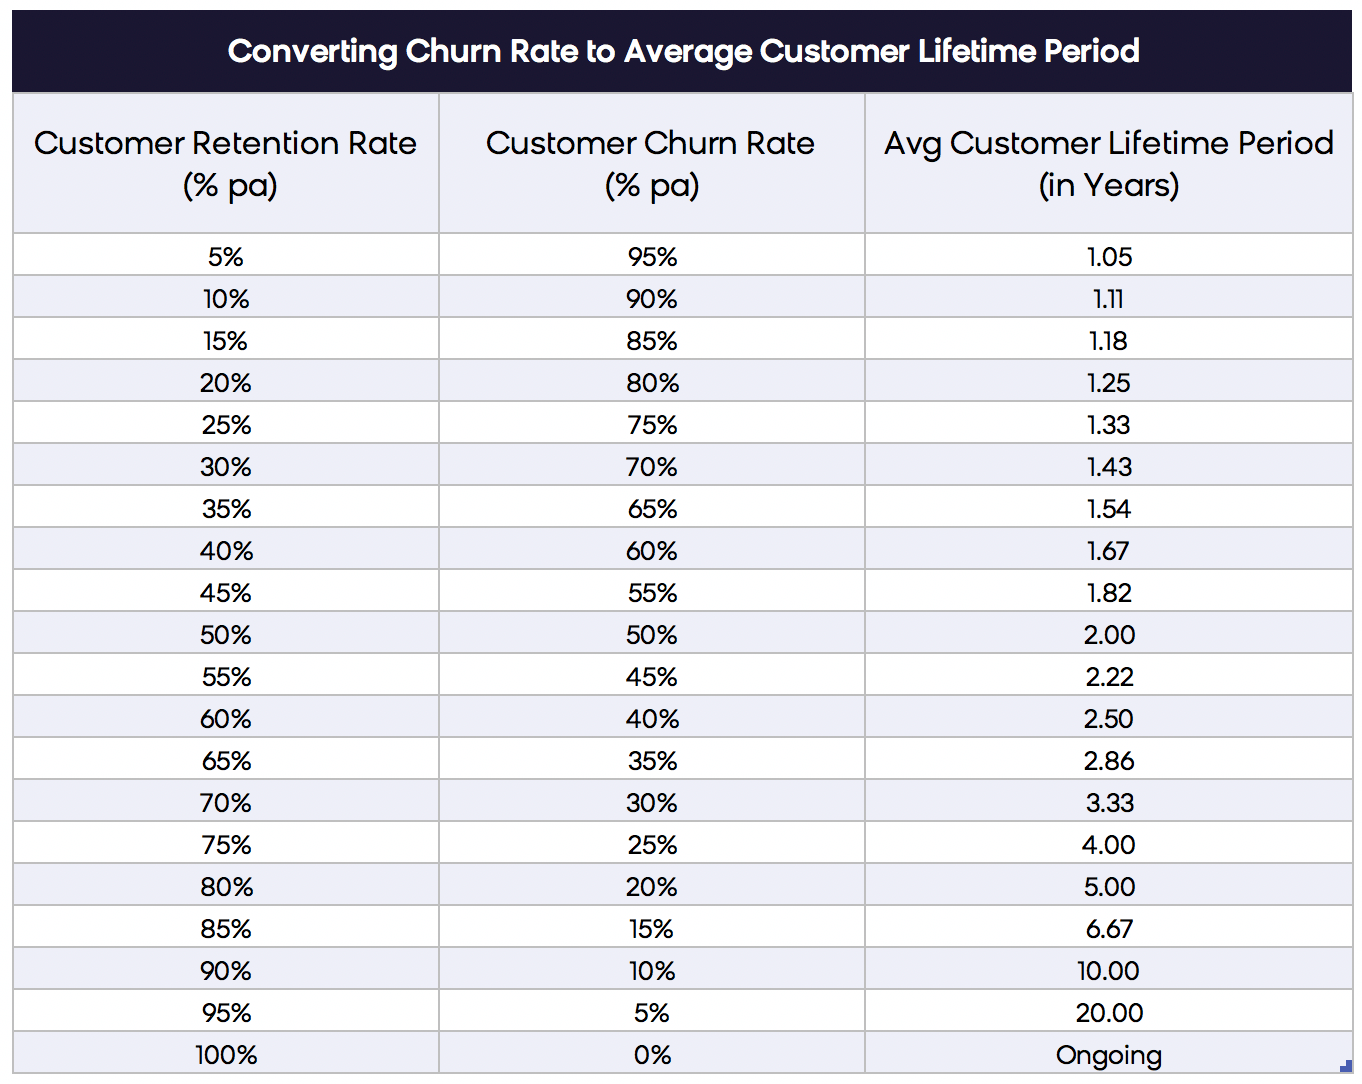 A Table for Converting Churn Rate to Average Customer Lifetime Period